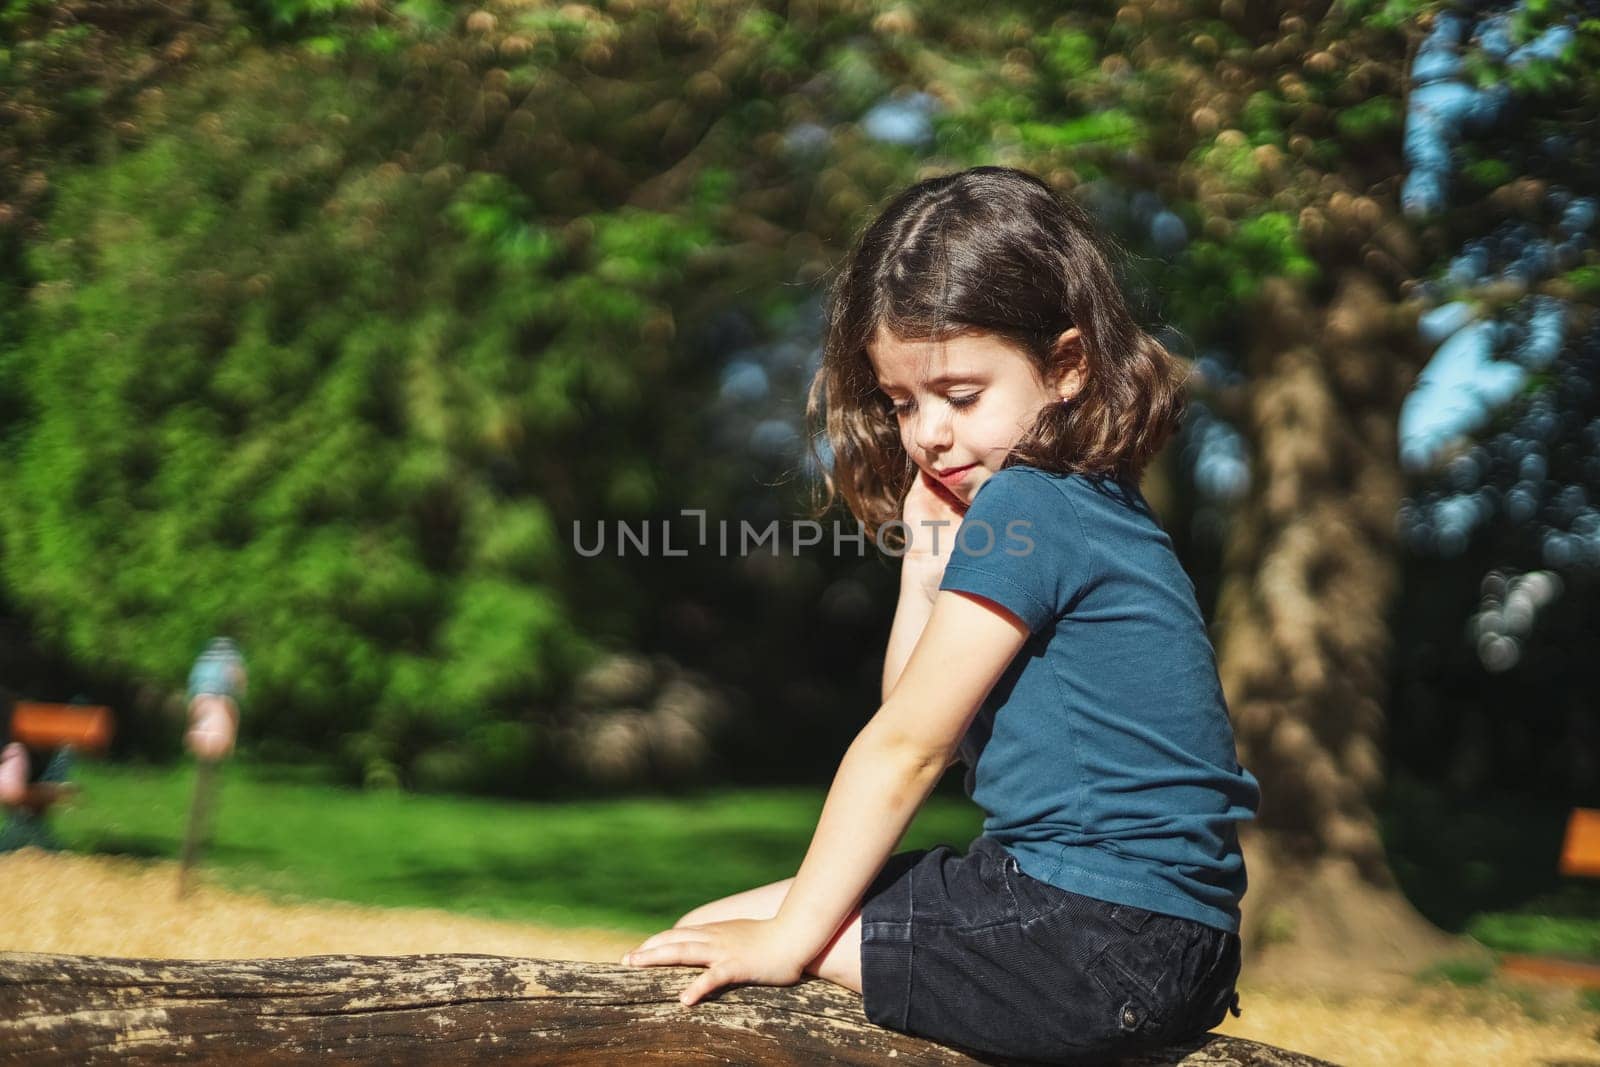 Portrait of a caucasian beautiful girl with short brown flowing hair, a blue t-shirt and shorts sits half-side on a wooden pole from a rope swing in a park on a playground, close-up side view with selective focus. The concept of PARKS and REC, happy childhood, children's picnic, holidays, children's recreation, outdoors.